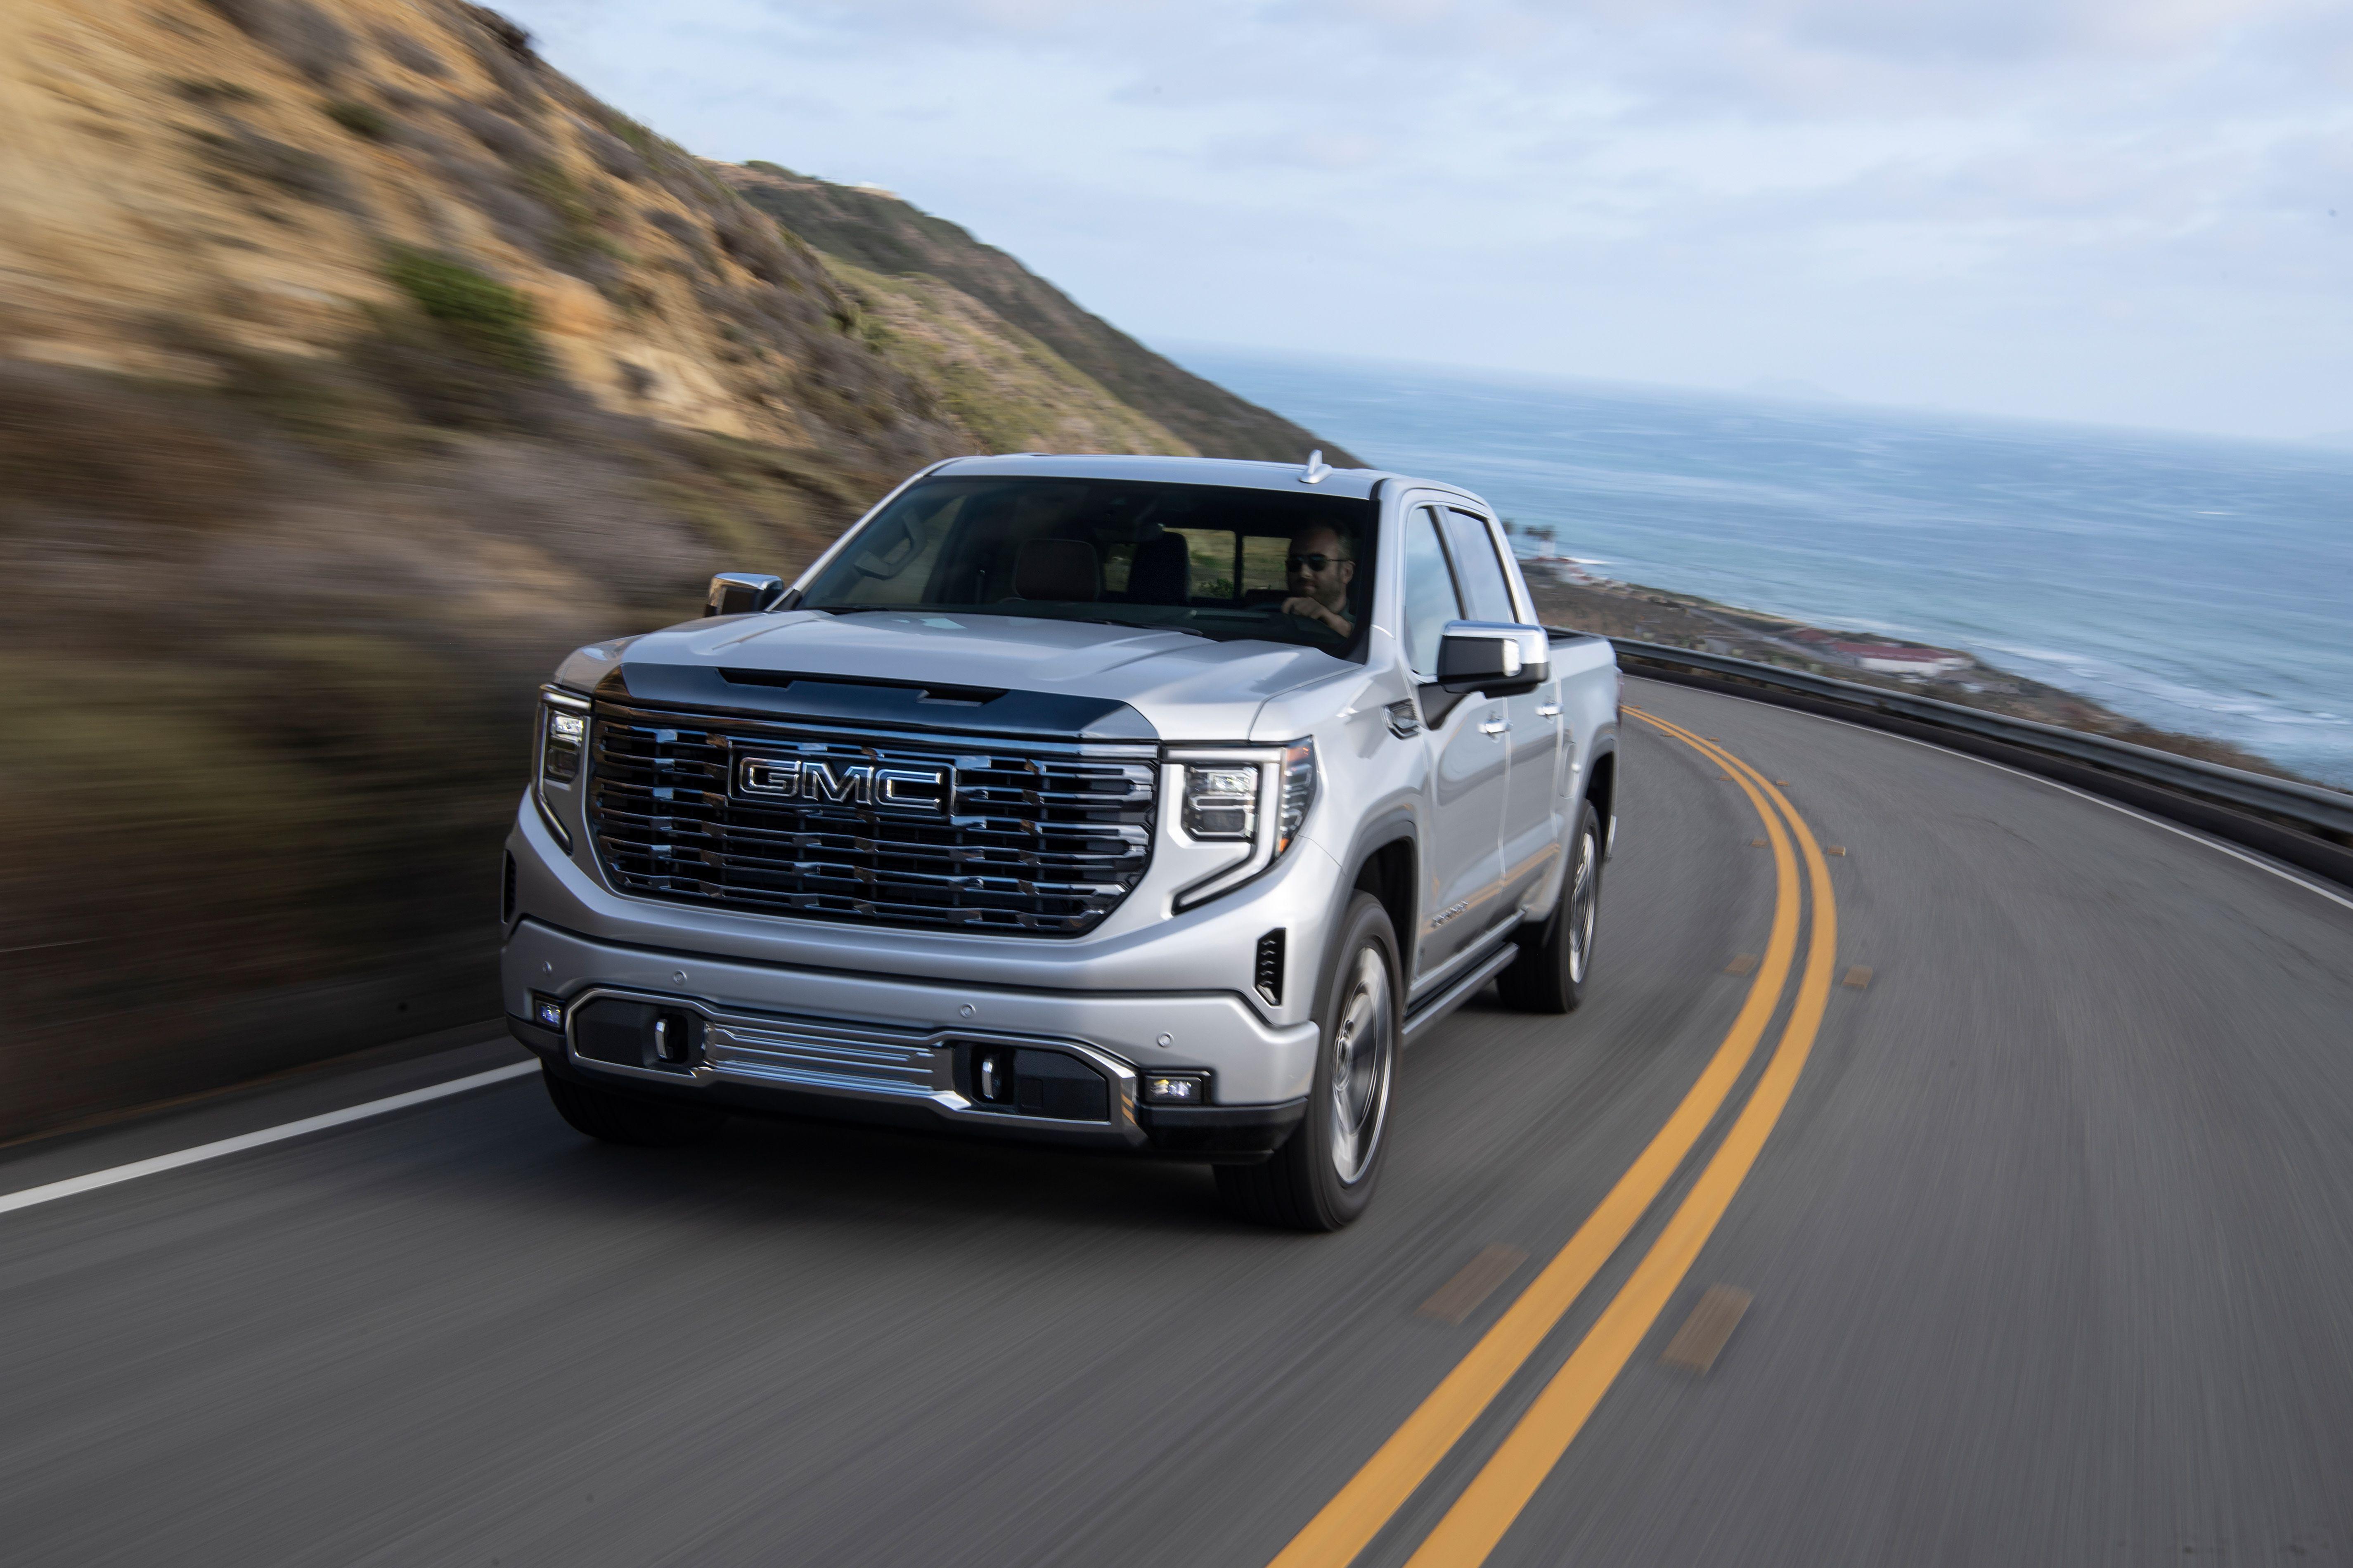 Gmc Sierra Re Pricing And Specs